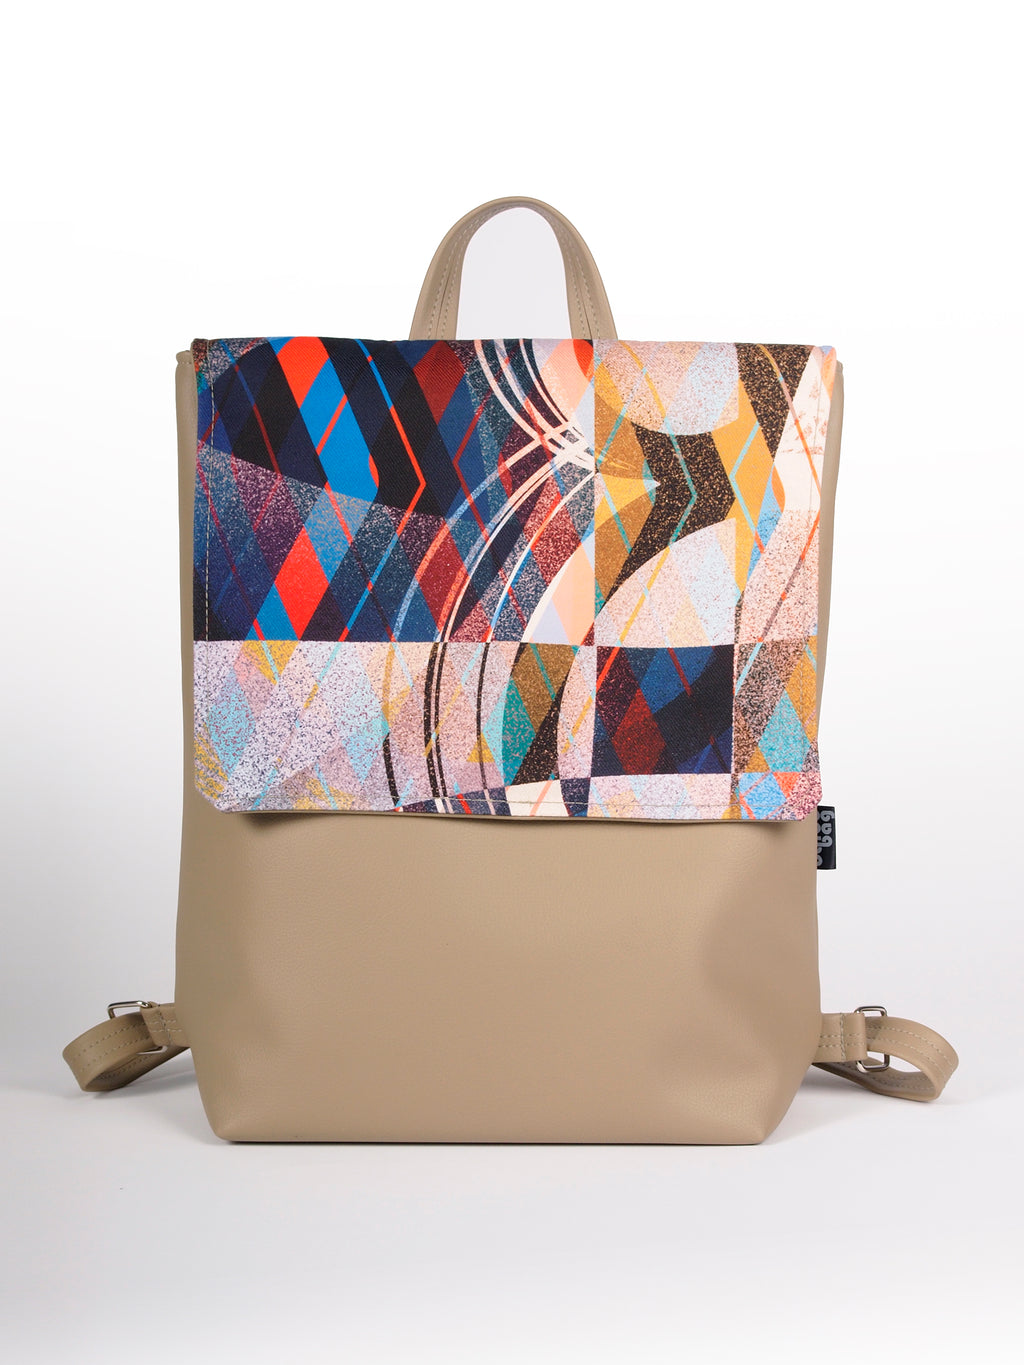 Bardo backpack large - On the beach - Premium backpack large from BARDO ART WORKS - Just lvbeige, brown, gift, handemade, natural, nature, painted patterns, spring, tablet, urban style, vegan leather, woman89.00! Shop now at BARDO ART WORKS